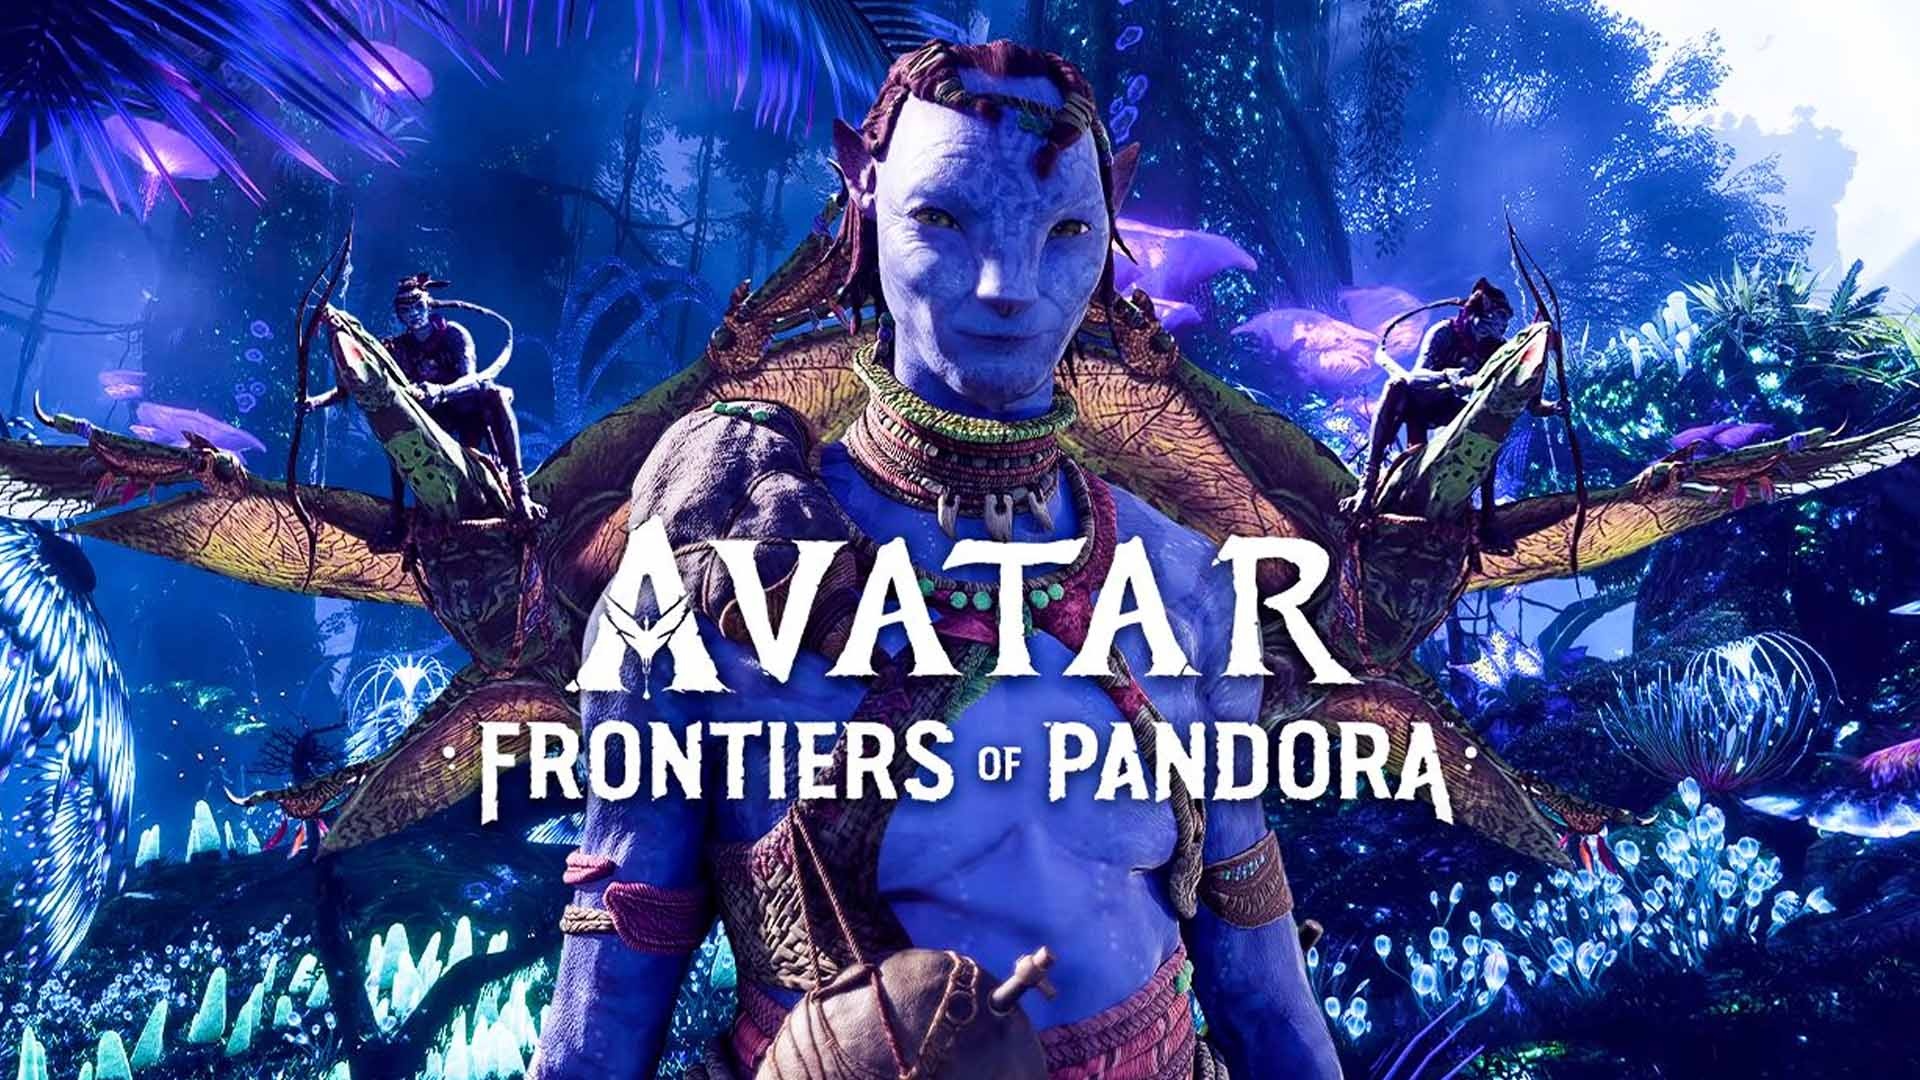 Avatar: Frontiers of Pandora: Tech test at E3, 2022, Set in the world of James Cameron's original movie 2009. 1920x1080 Full HD Wallpaper.